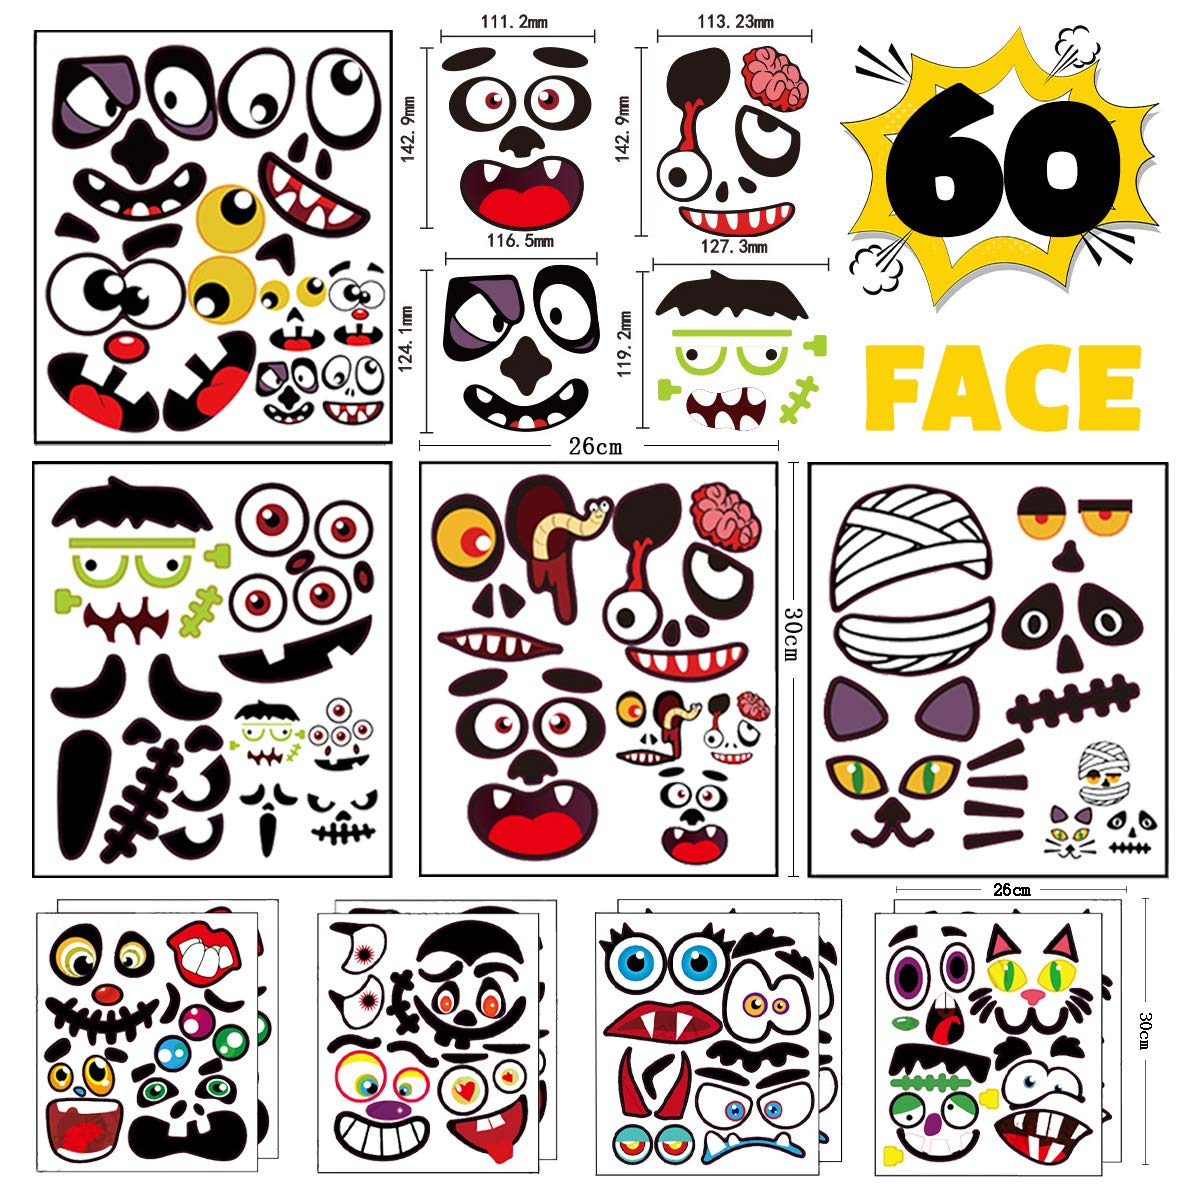 Pumpkin Decorating Halloween Stickers for Kids - Make 60 Funny Face and Classic Pumpkin Expressions Crafts, Holiday Decor Kit Party Best Gift for Kids - 12 Sheet